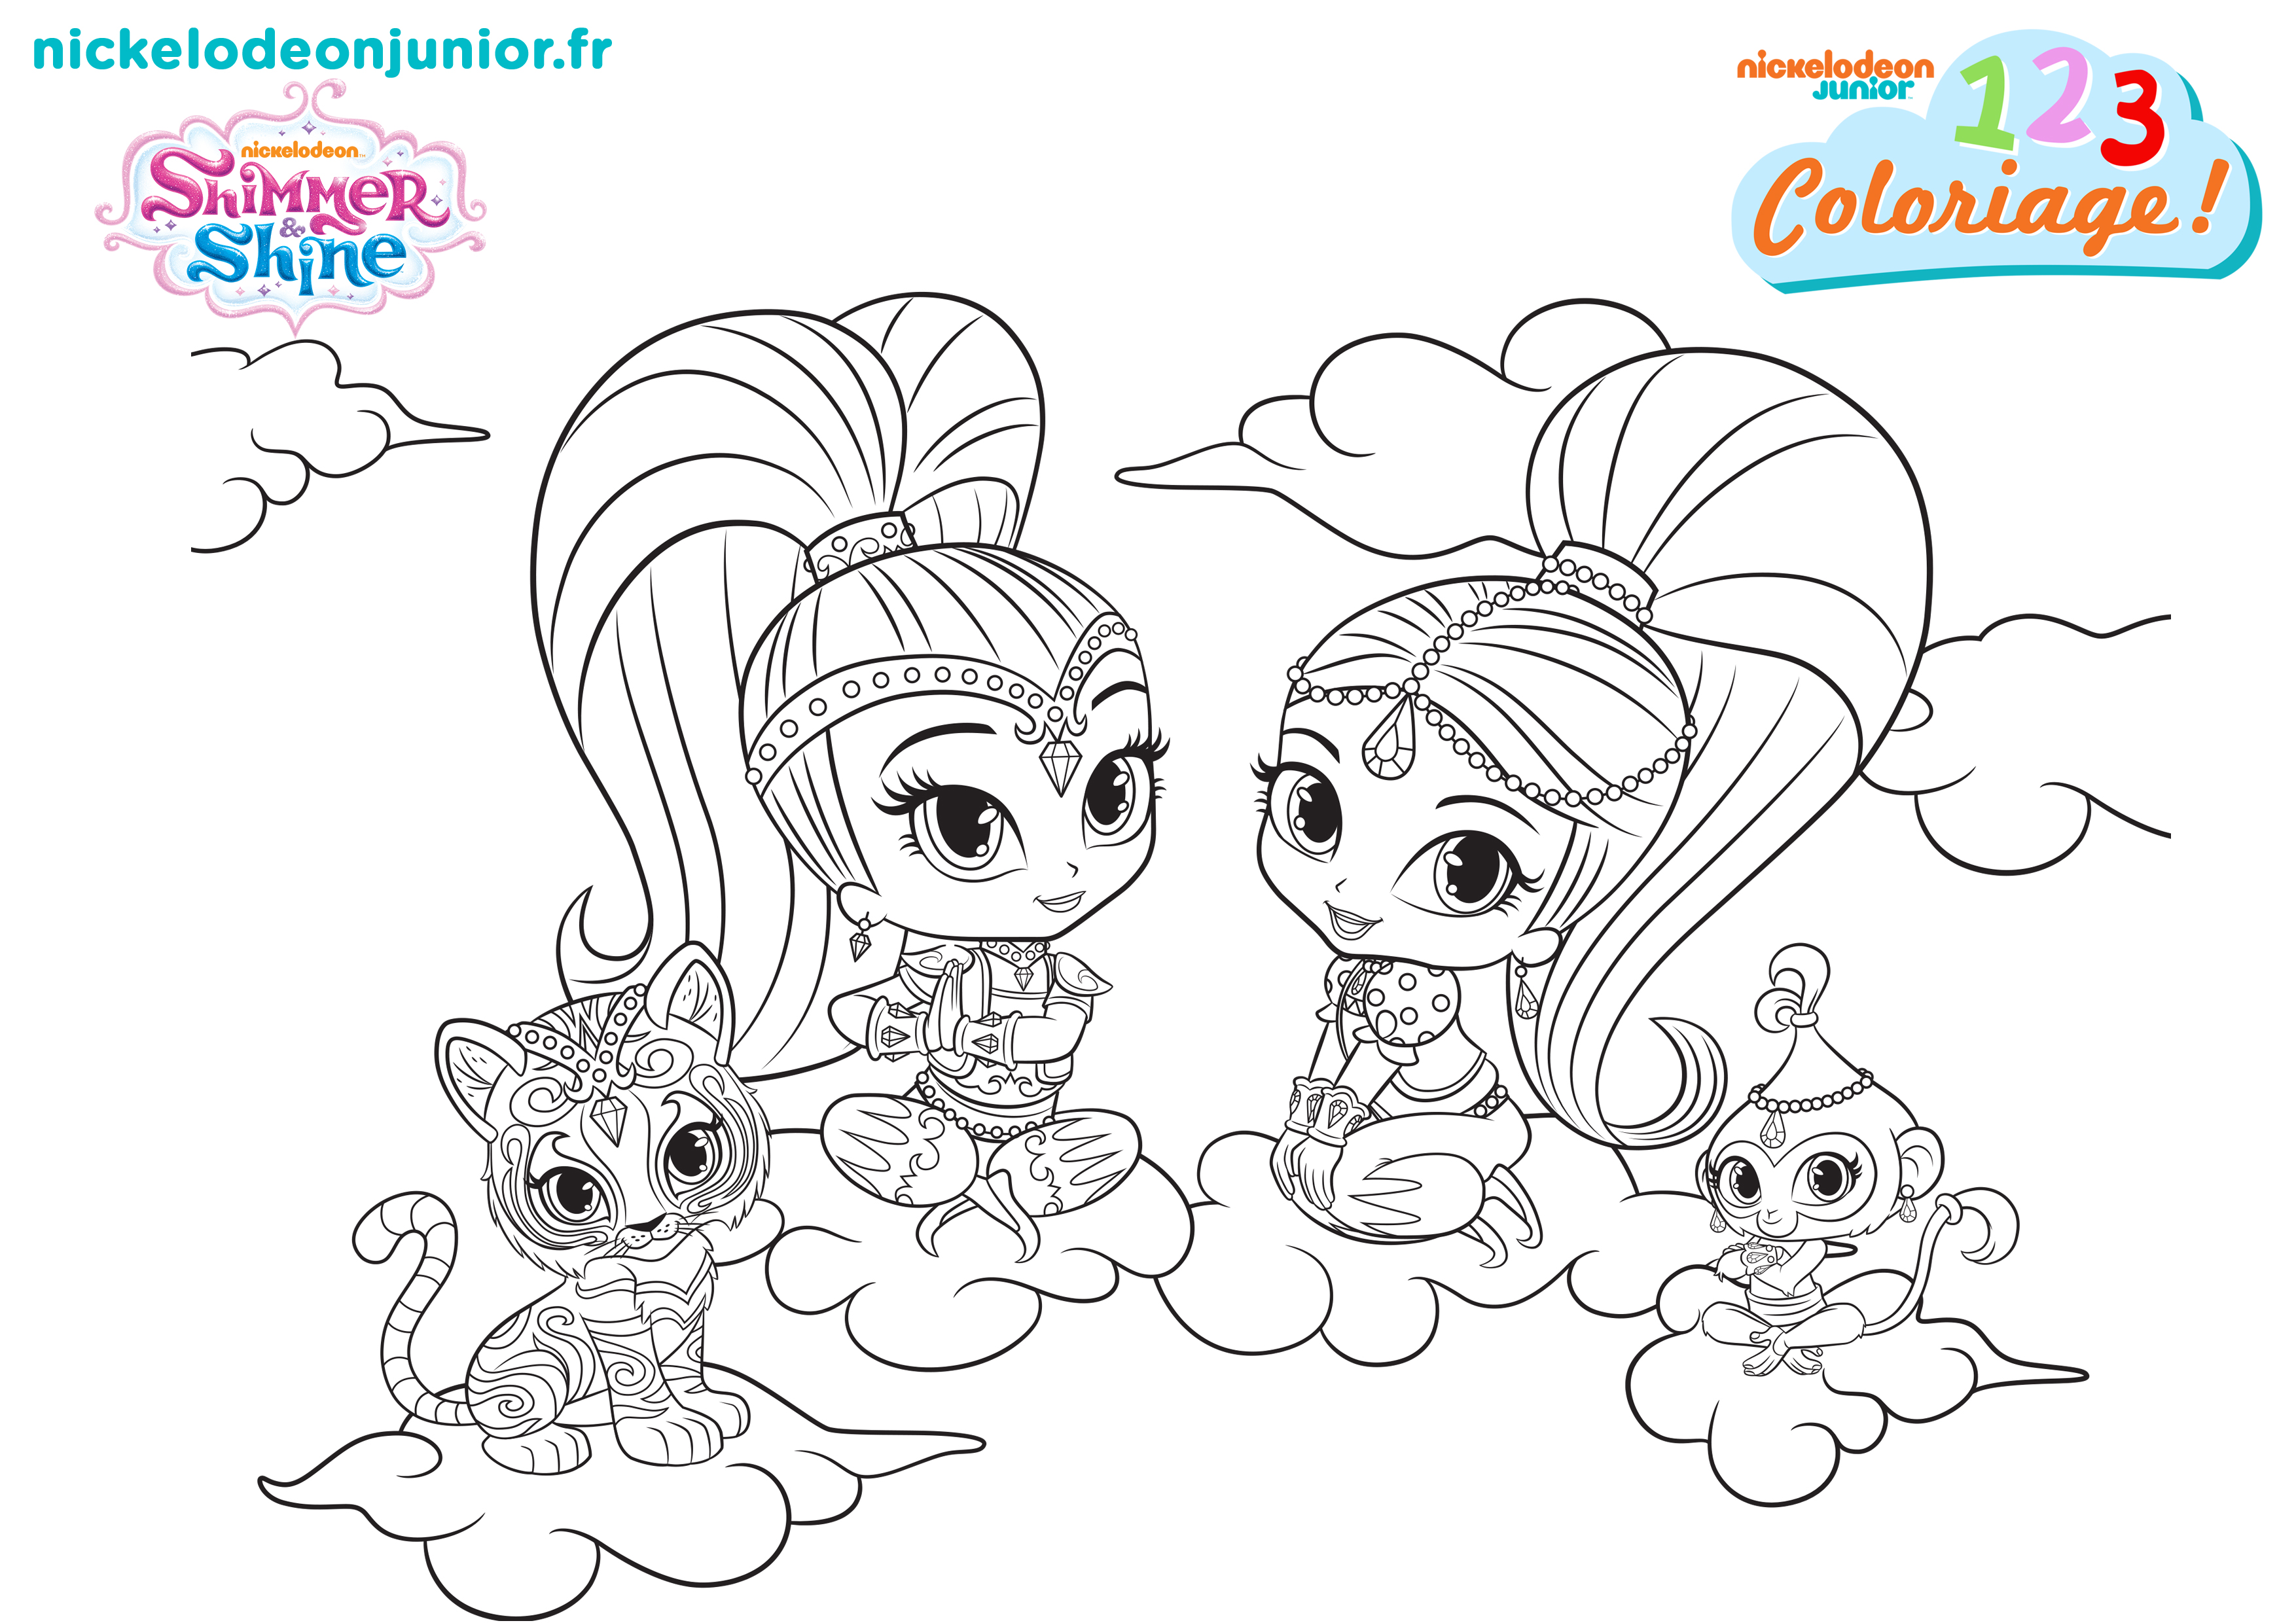 Coloriages Shimmer & Shine